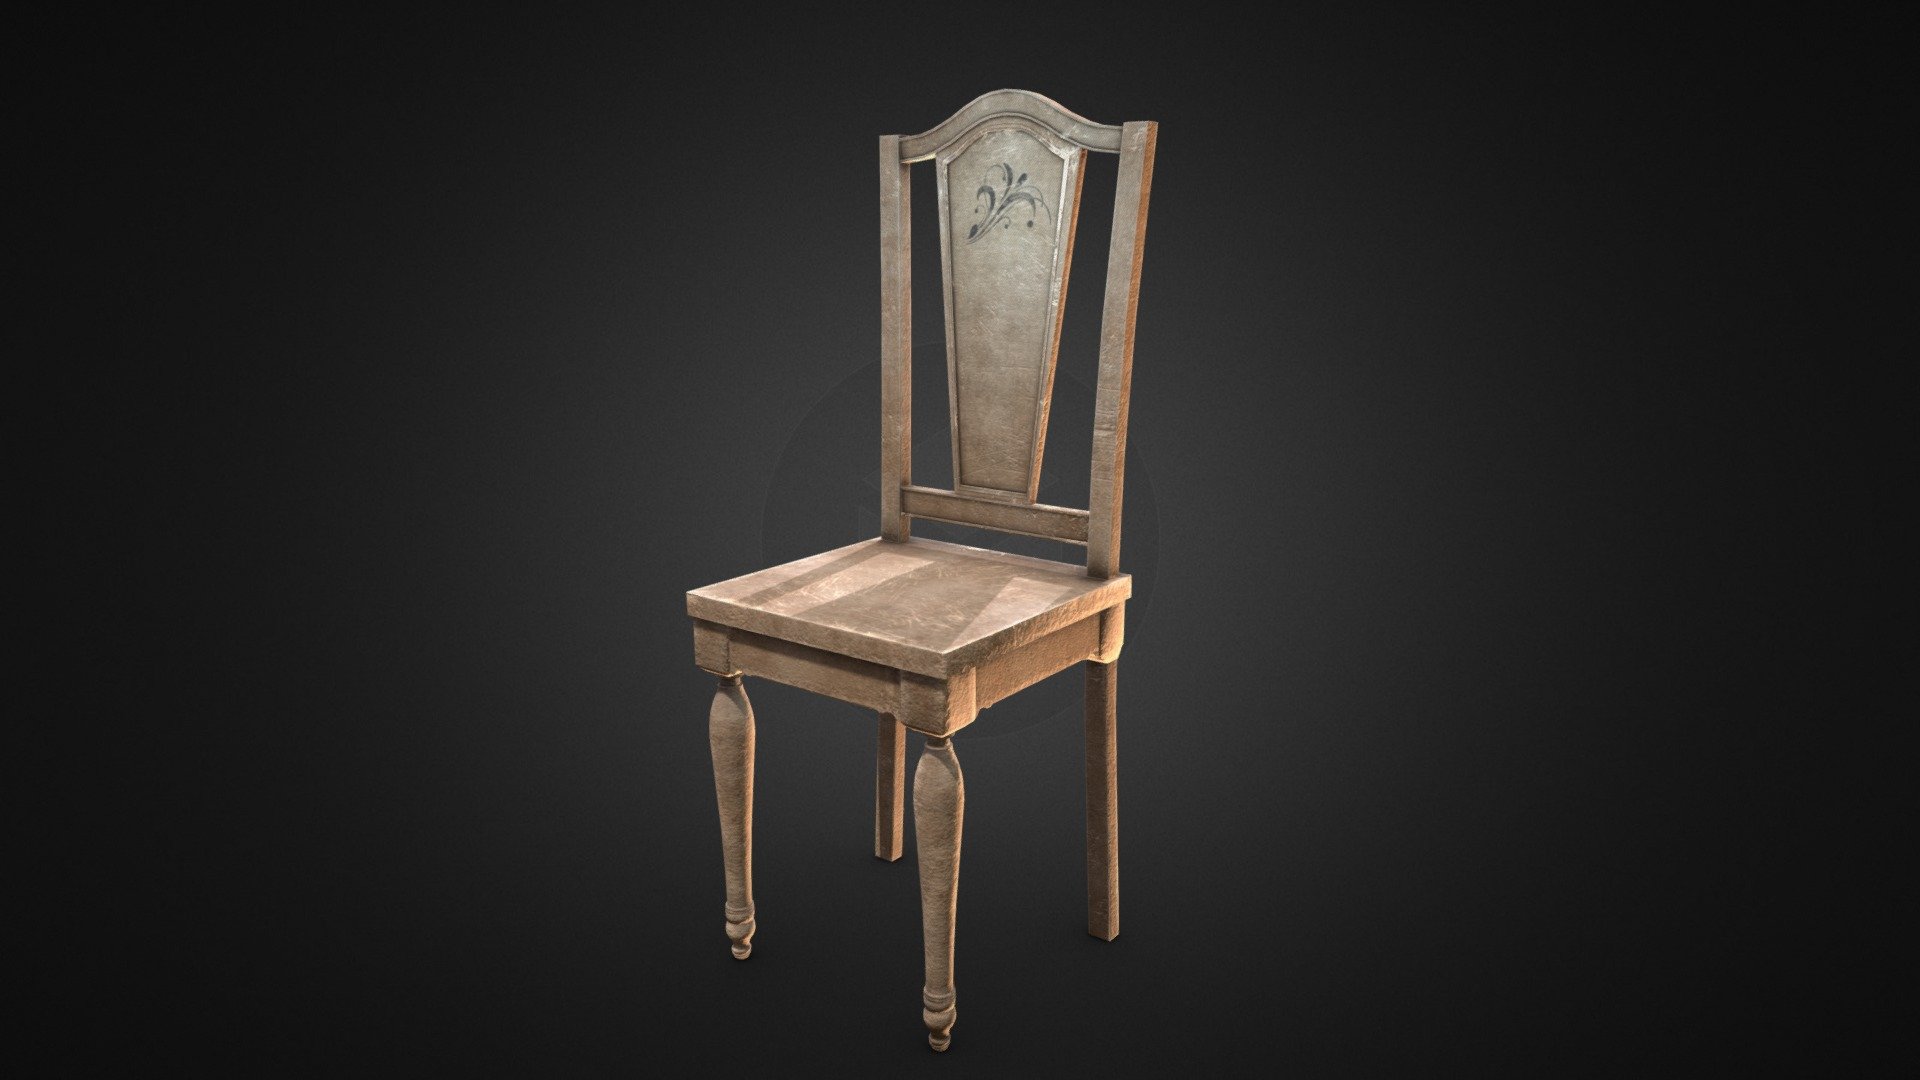 This is a model of an old chair made for old environments with wooden decorations and weary objects - Old Chair 3D Model - 3D model by IPfuentes 3d model